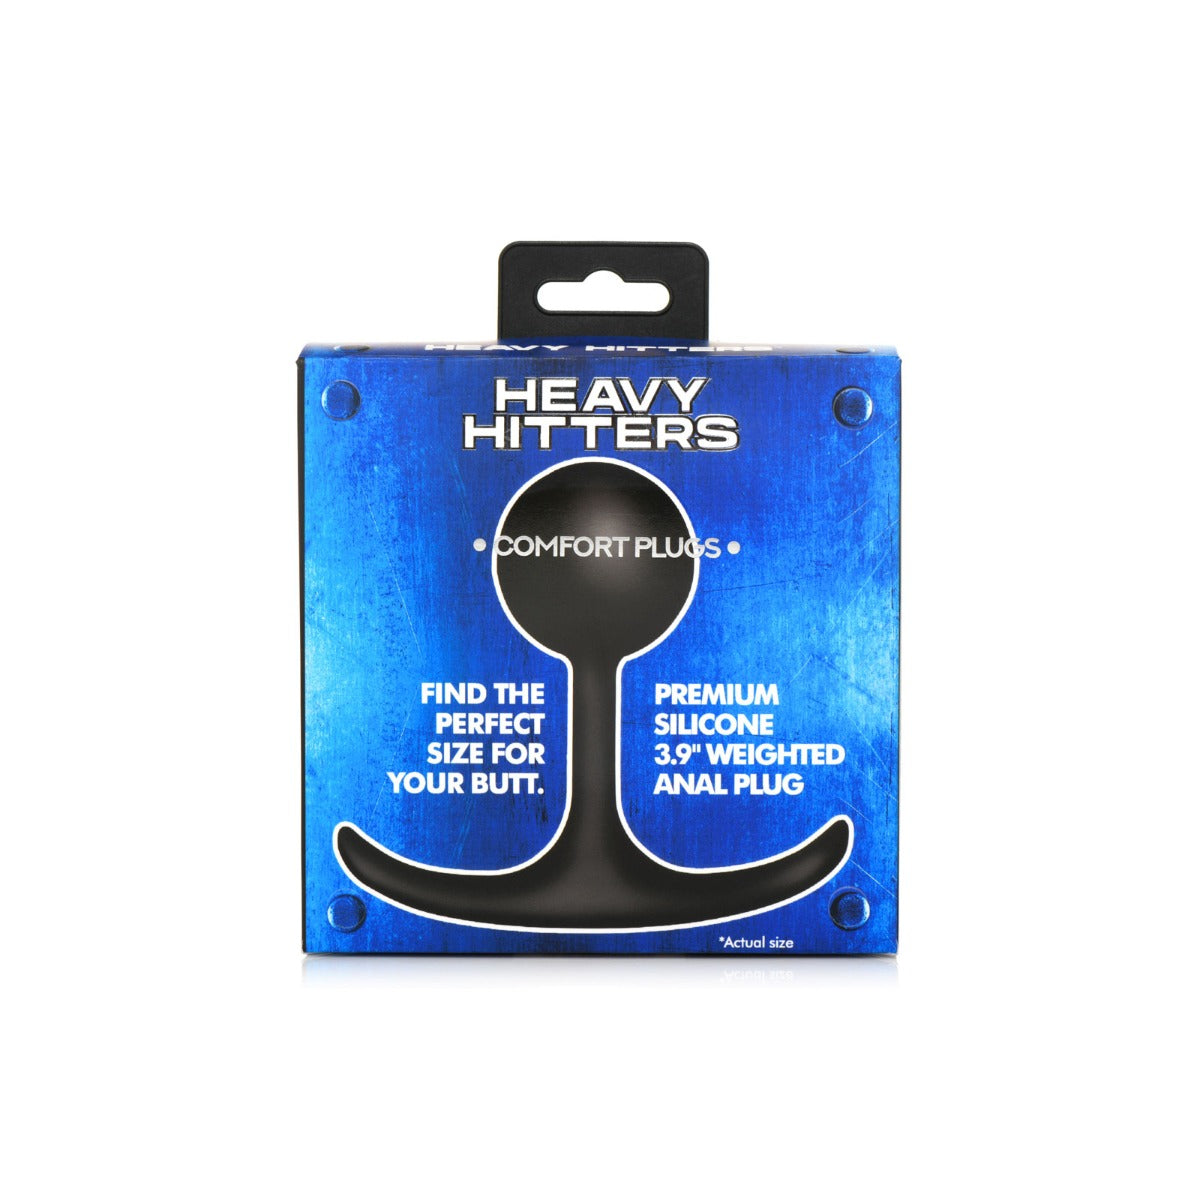 Heavy Hitters Premium Silicone Weighted Round Plug (8100496441583)